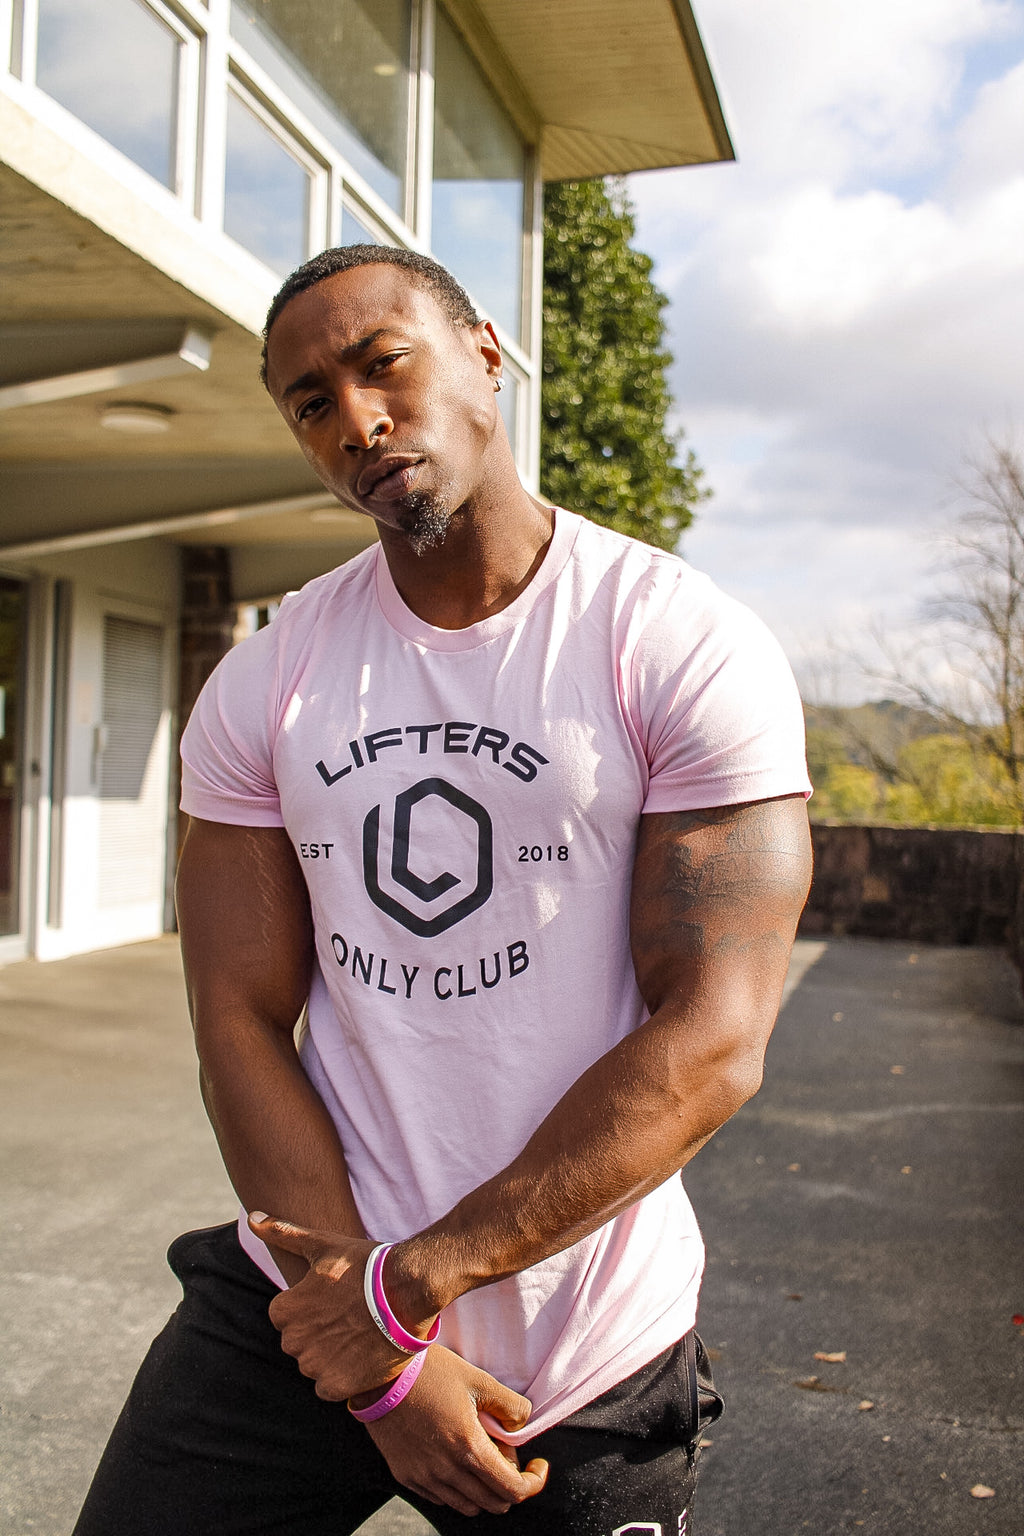 Lifter x Breast Cancer Tee